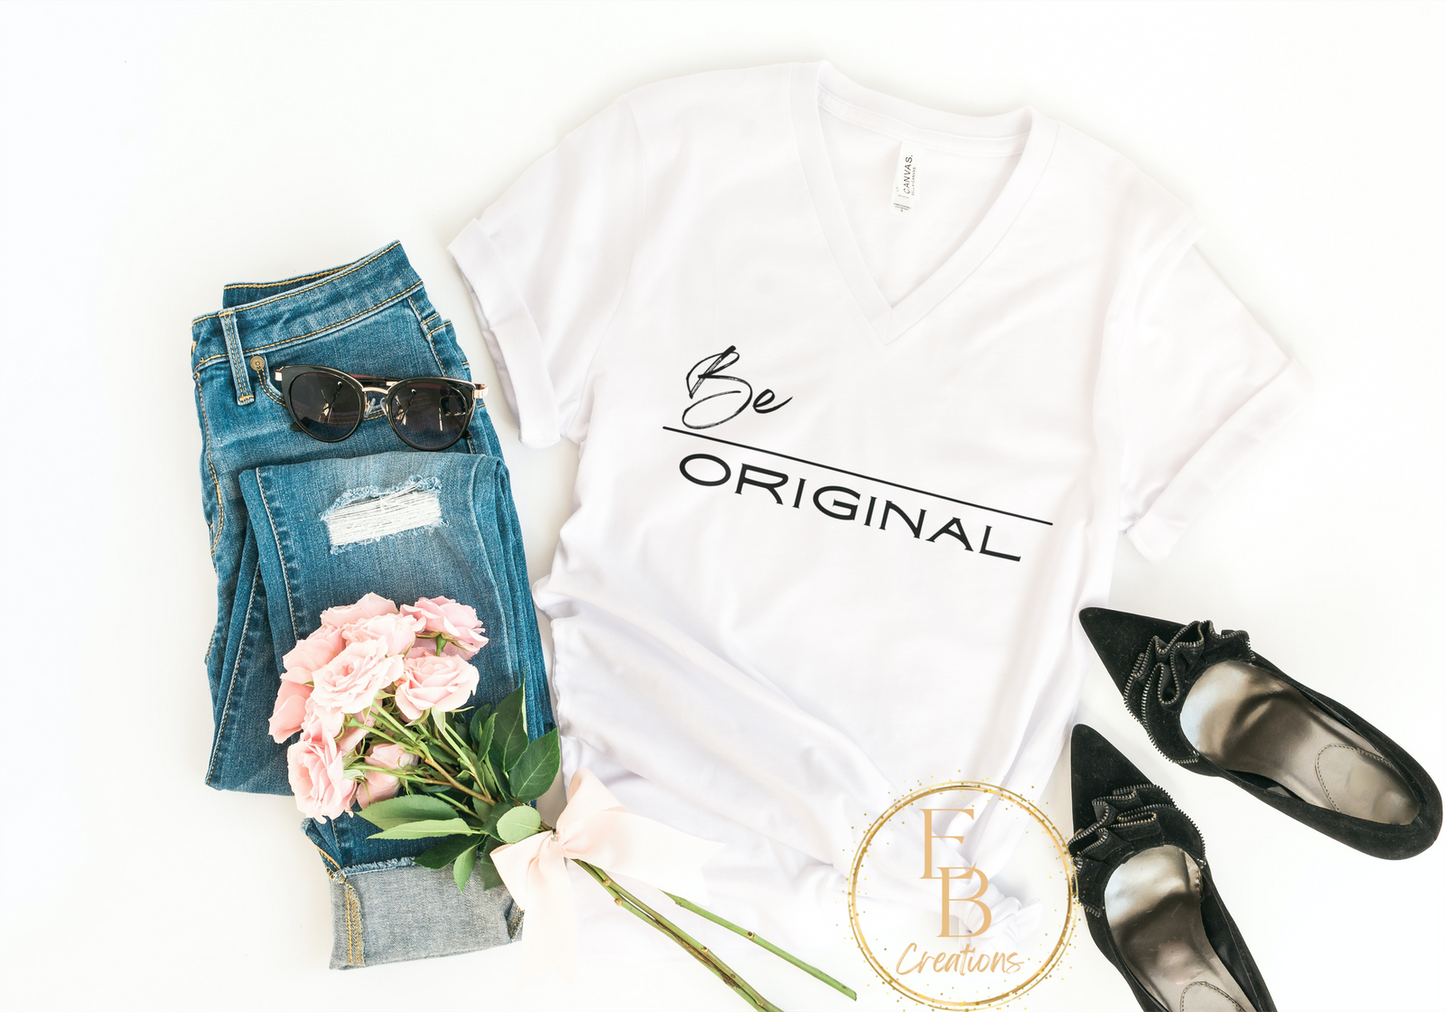 Be Original Shirt | Be Original Sweatshirt | Motivational Quotes and sayings | Inspirational and funny - Eb Creations Be Original Shirt | Be Original Sweatshirt | Motivational Quotes and sayings | Inspirational and funny